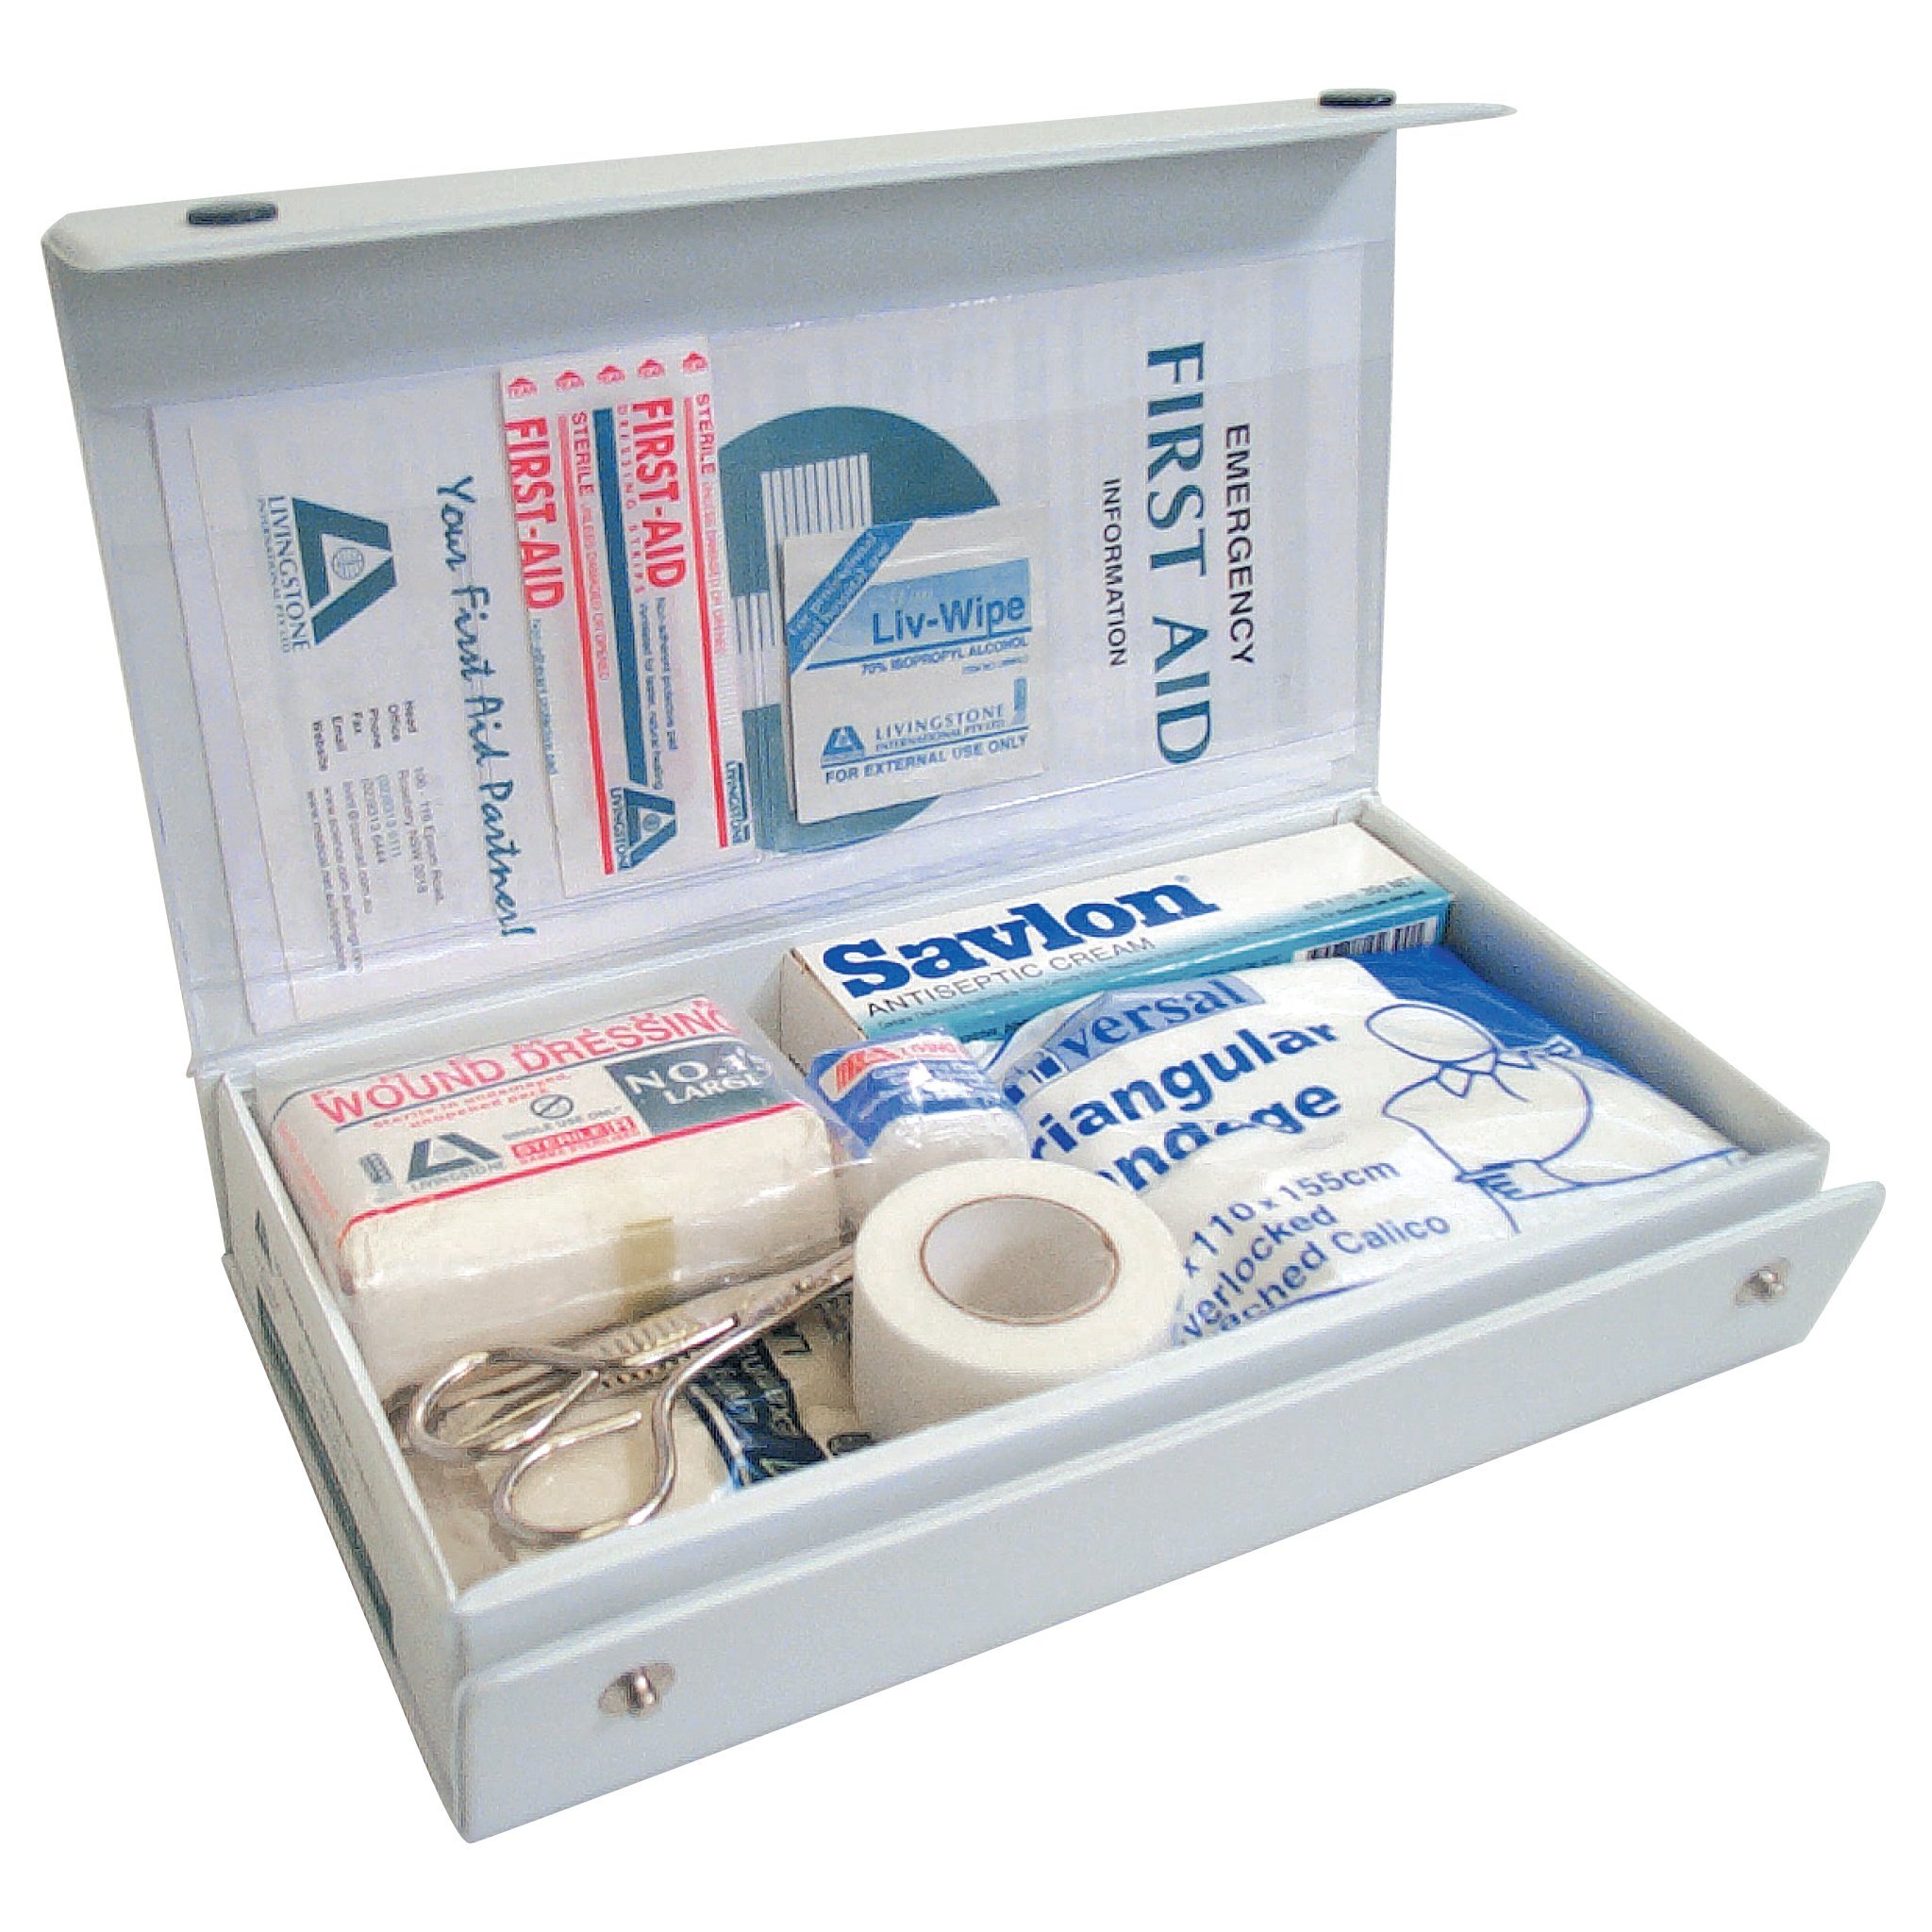 travel ready first aid kit